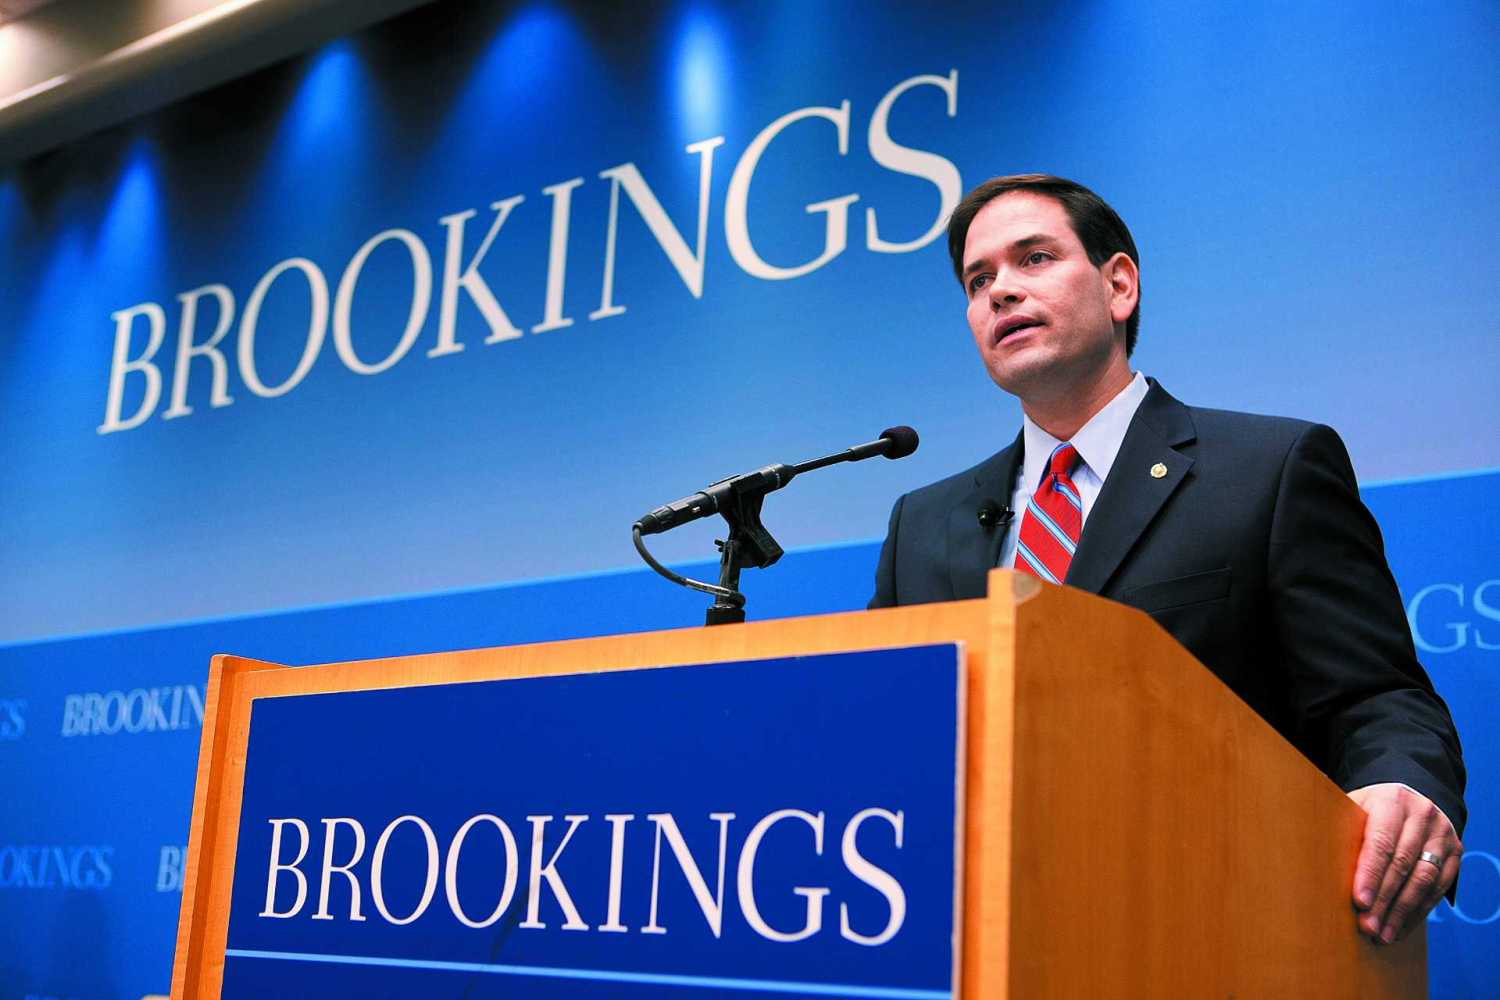 Sen. Marco Rubio discusses foreign policy ideas in Brookings speech